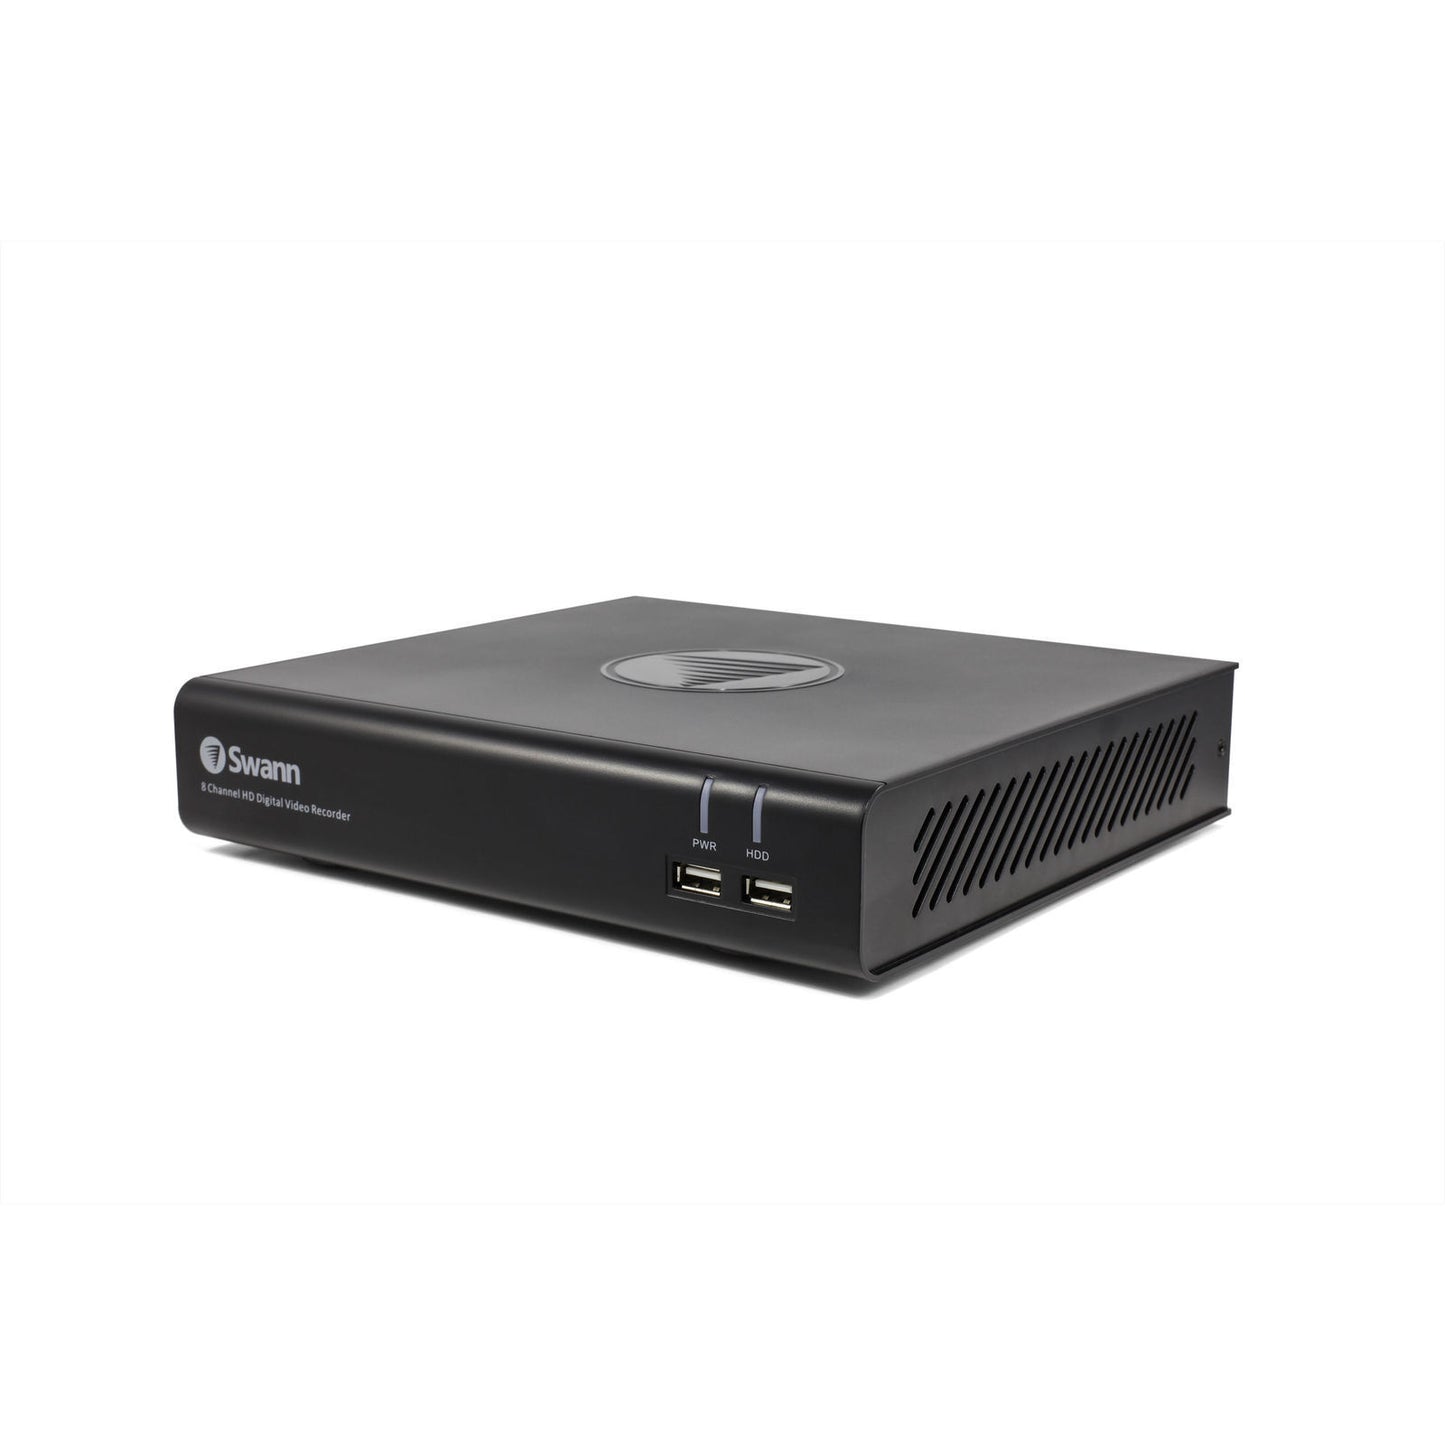 Swann DVR8-4480 8 Channel with 1TB HDD and 4 PRO-1080MSFB Cameras